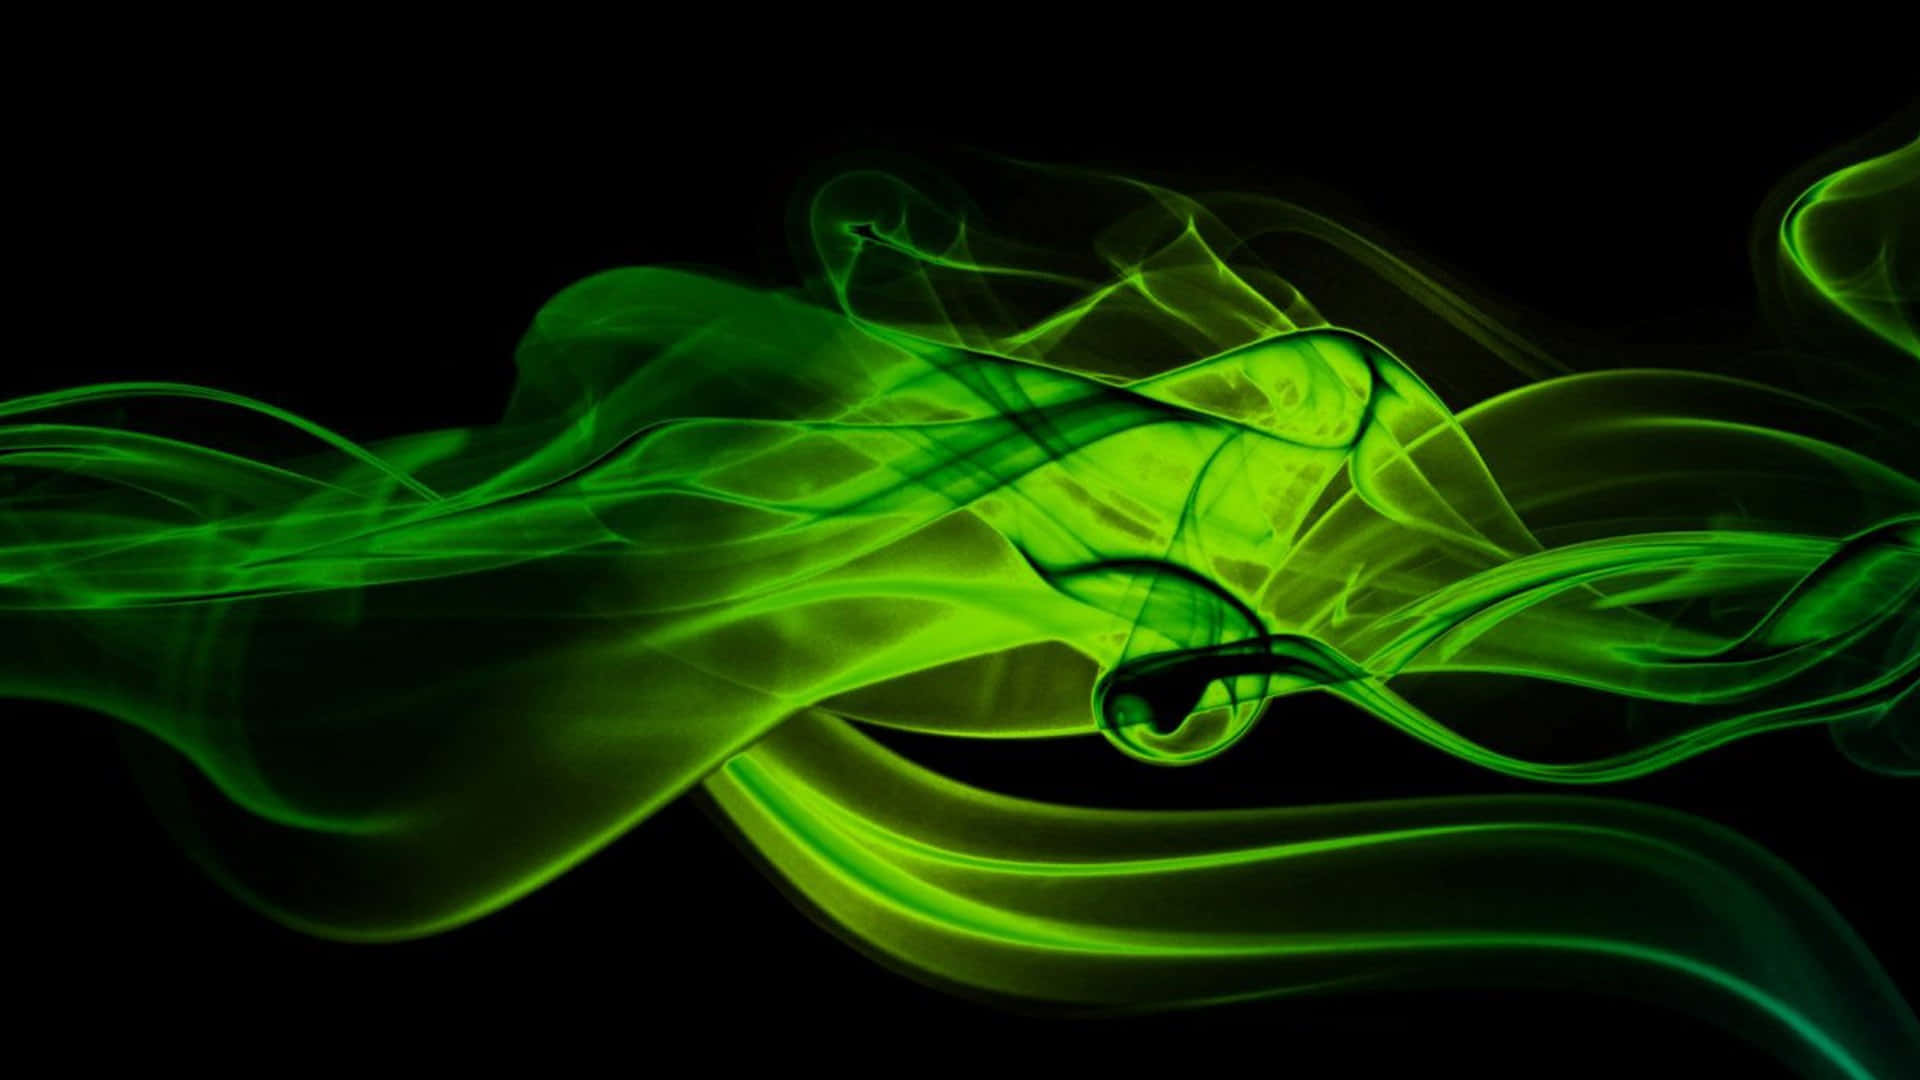 Download Striking Neon Green Aesthetic Background | Wallpapers.com